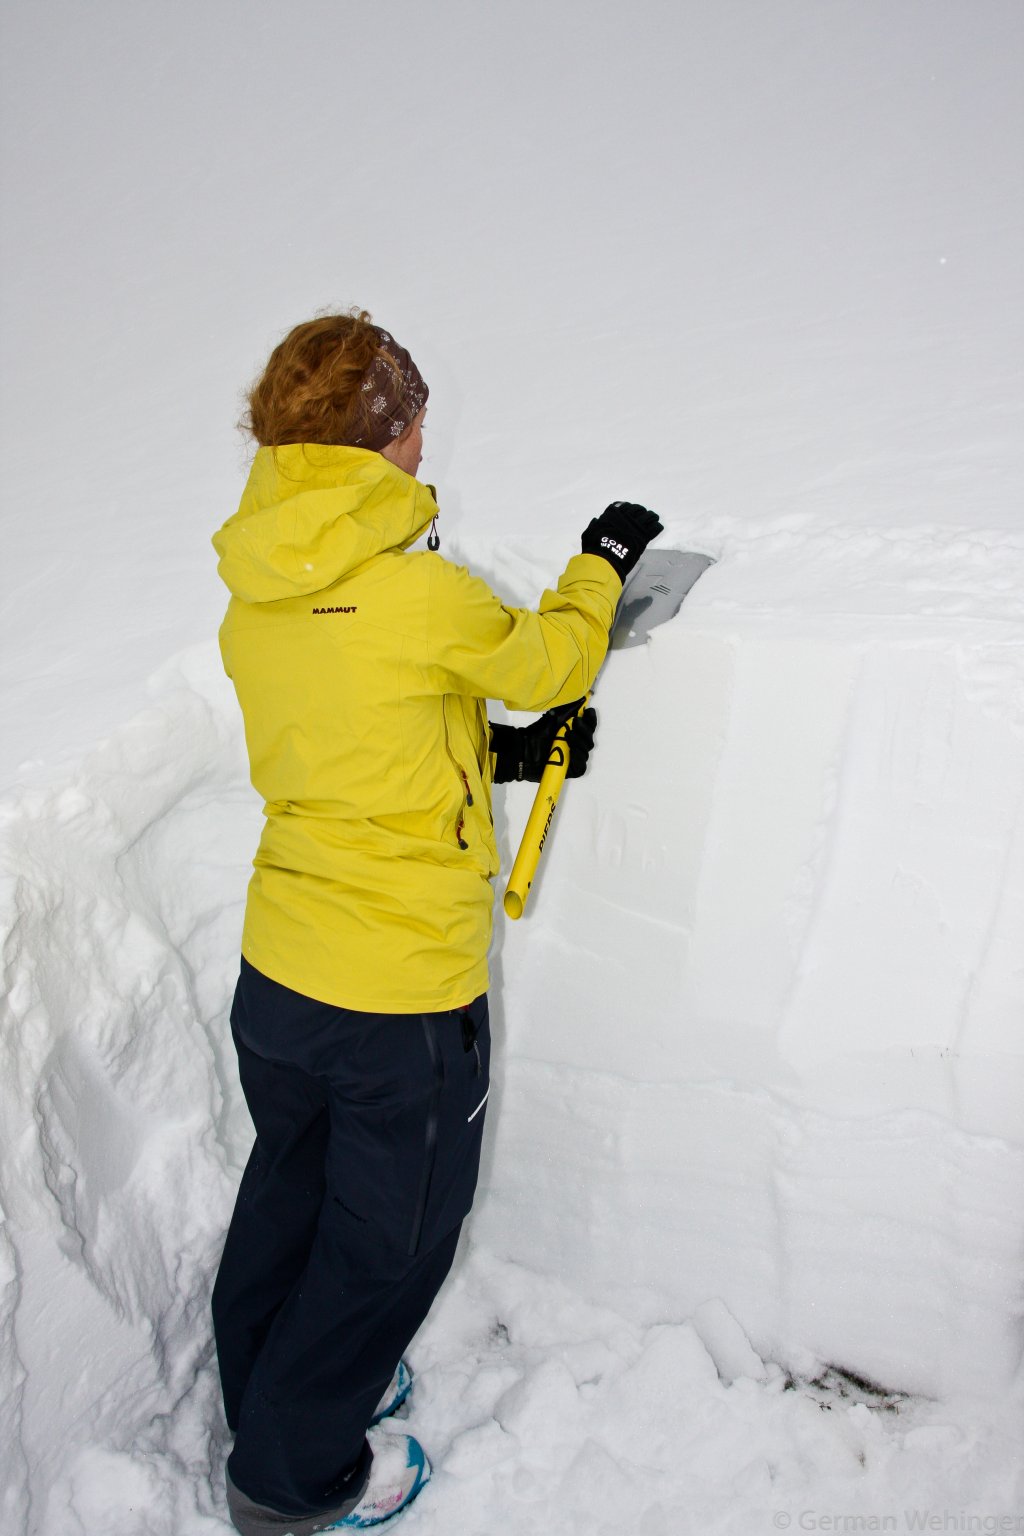 Snow profiling - it can get cold if the breaks are too long